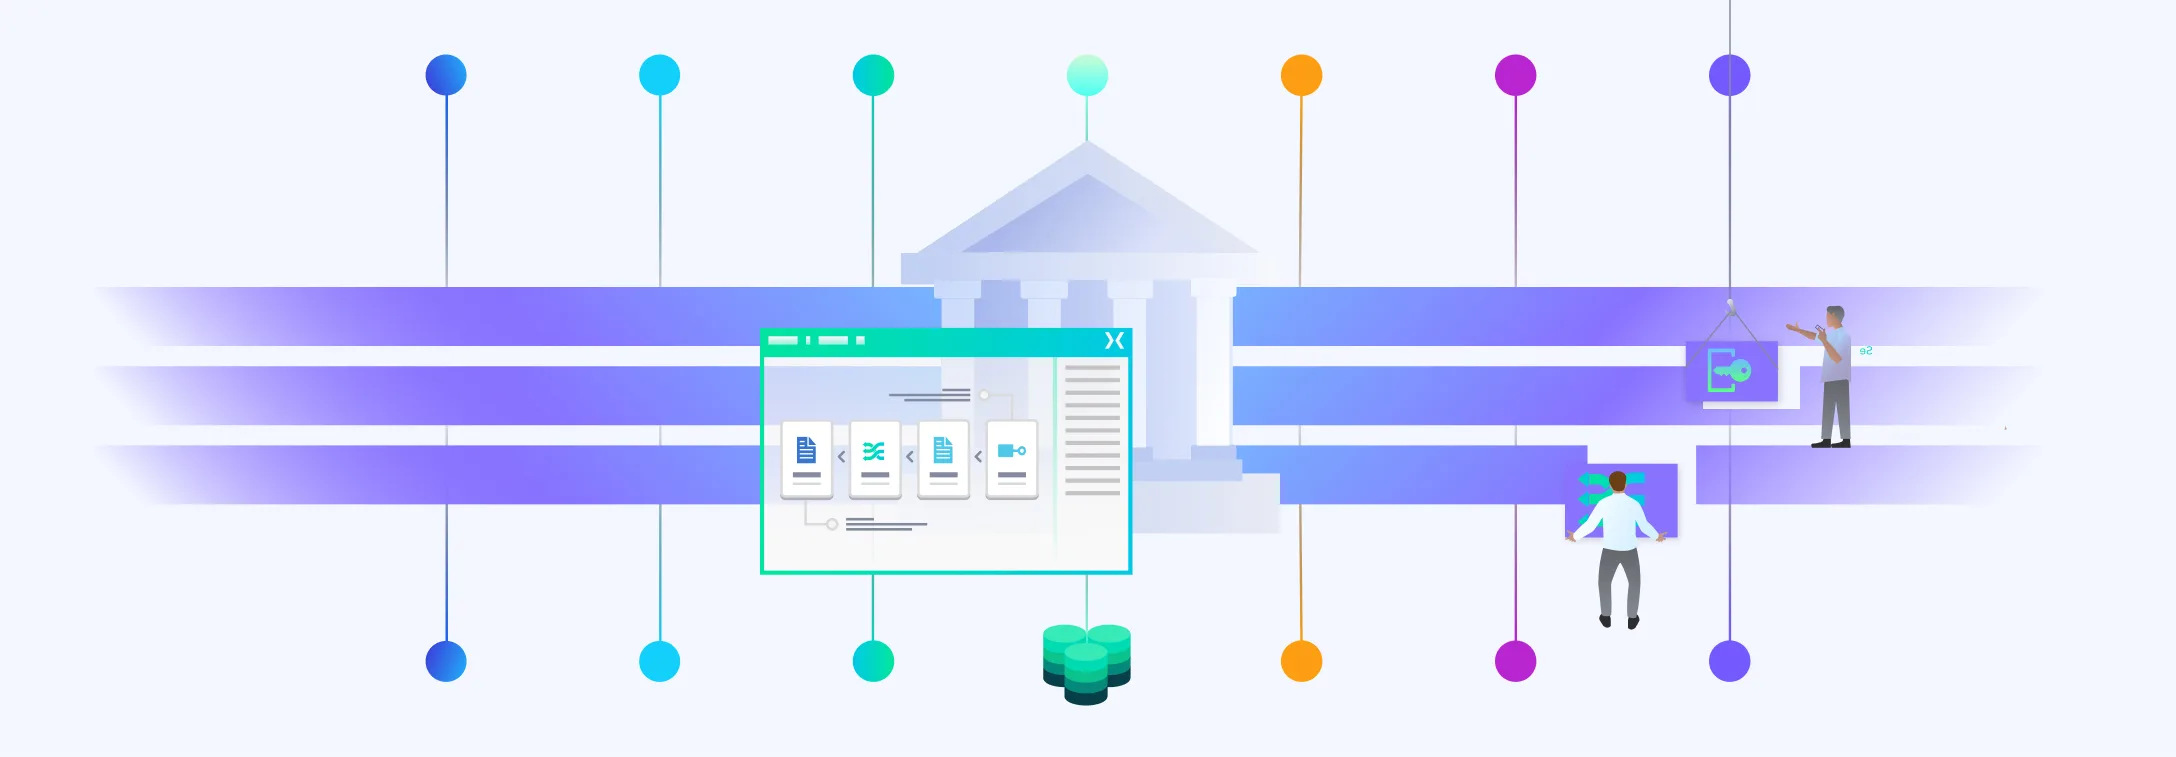 Integration Platform as a Service: One Tool to Cut Costs, Eliminate Dependencies, and Scale Fintech Connections